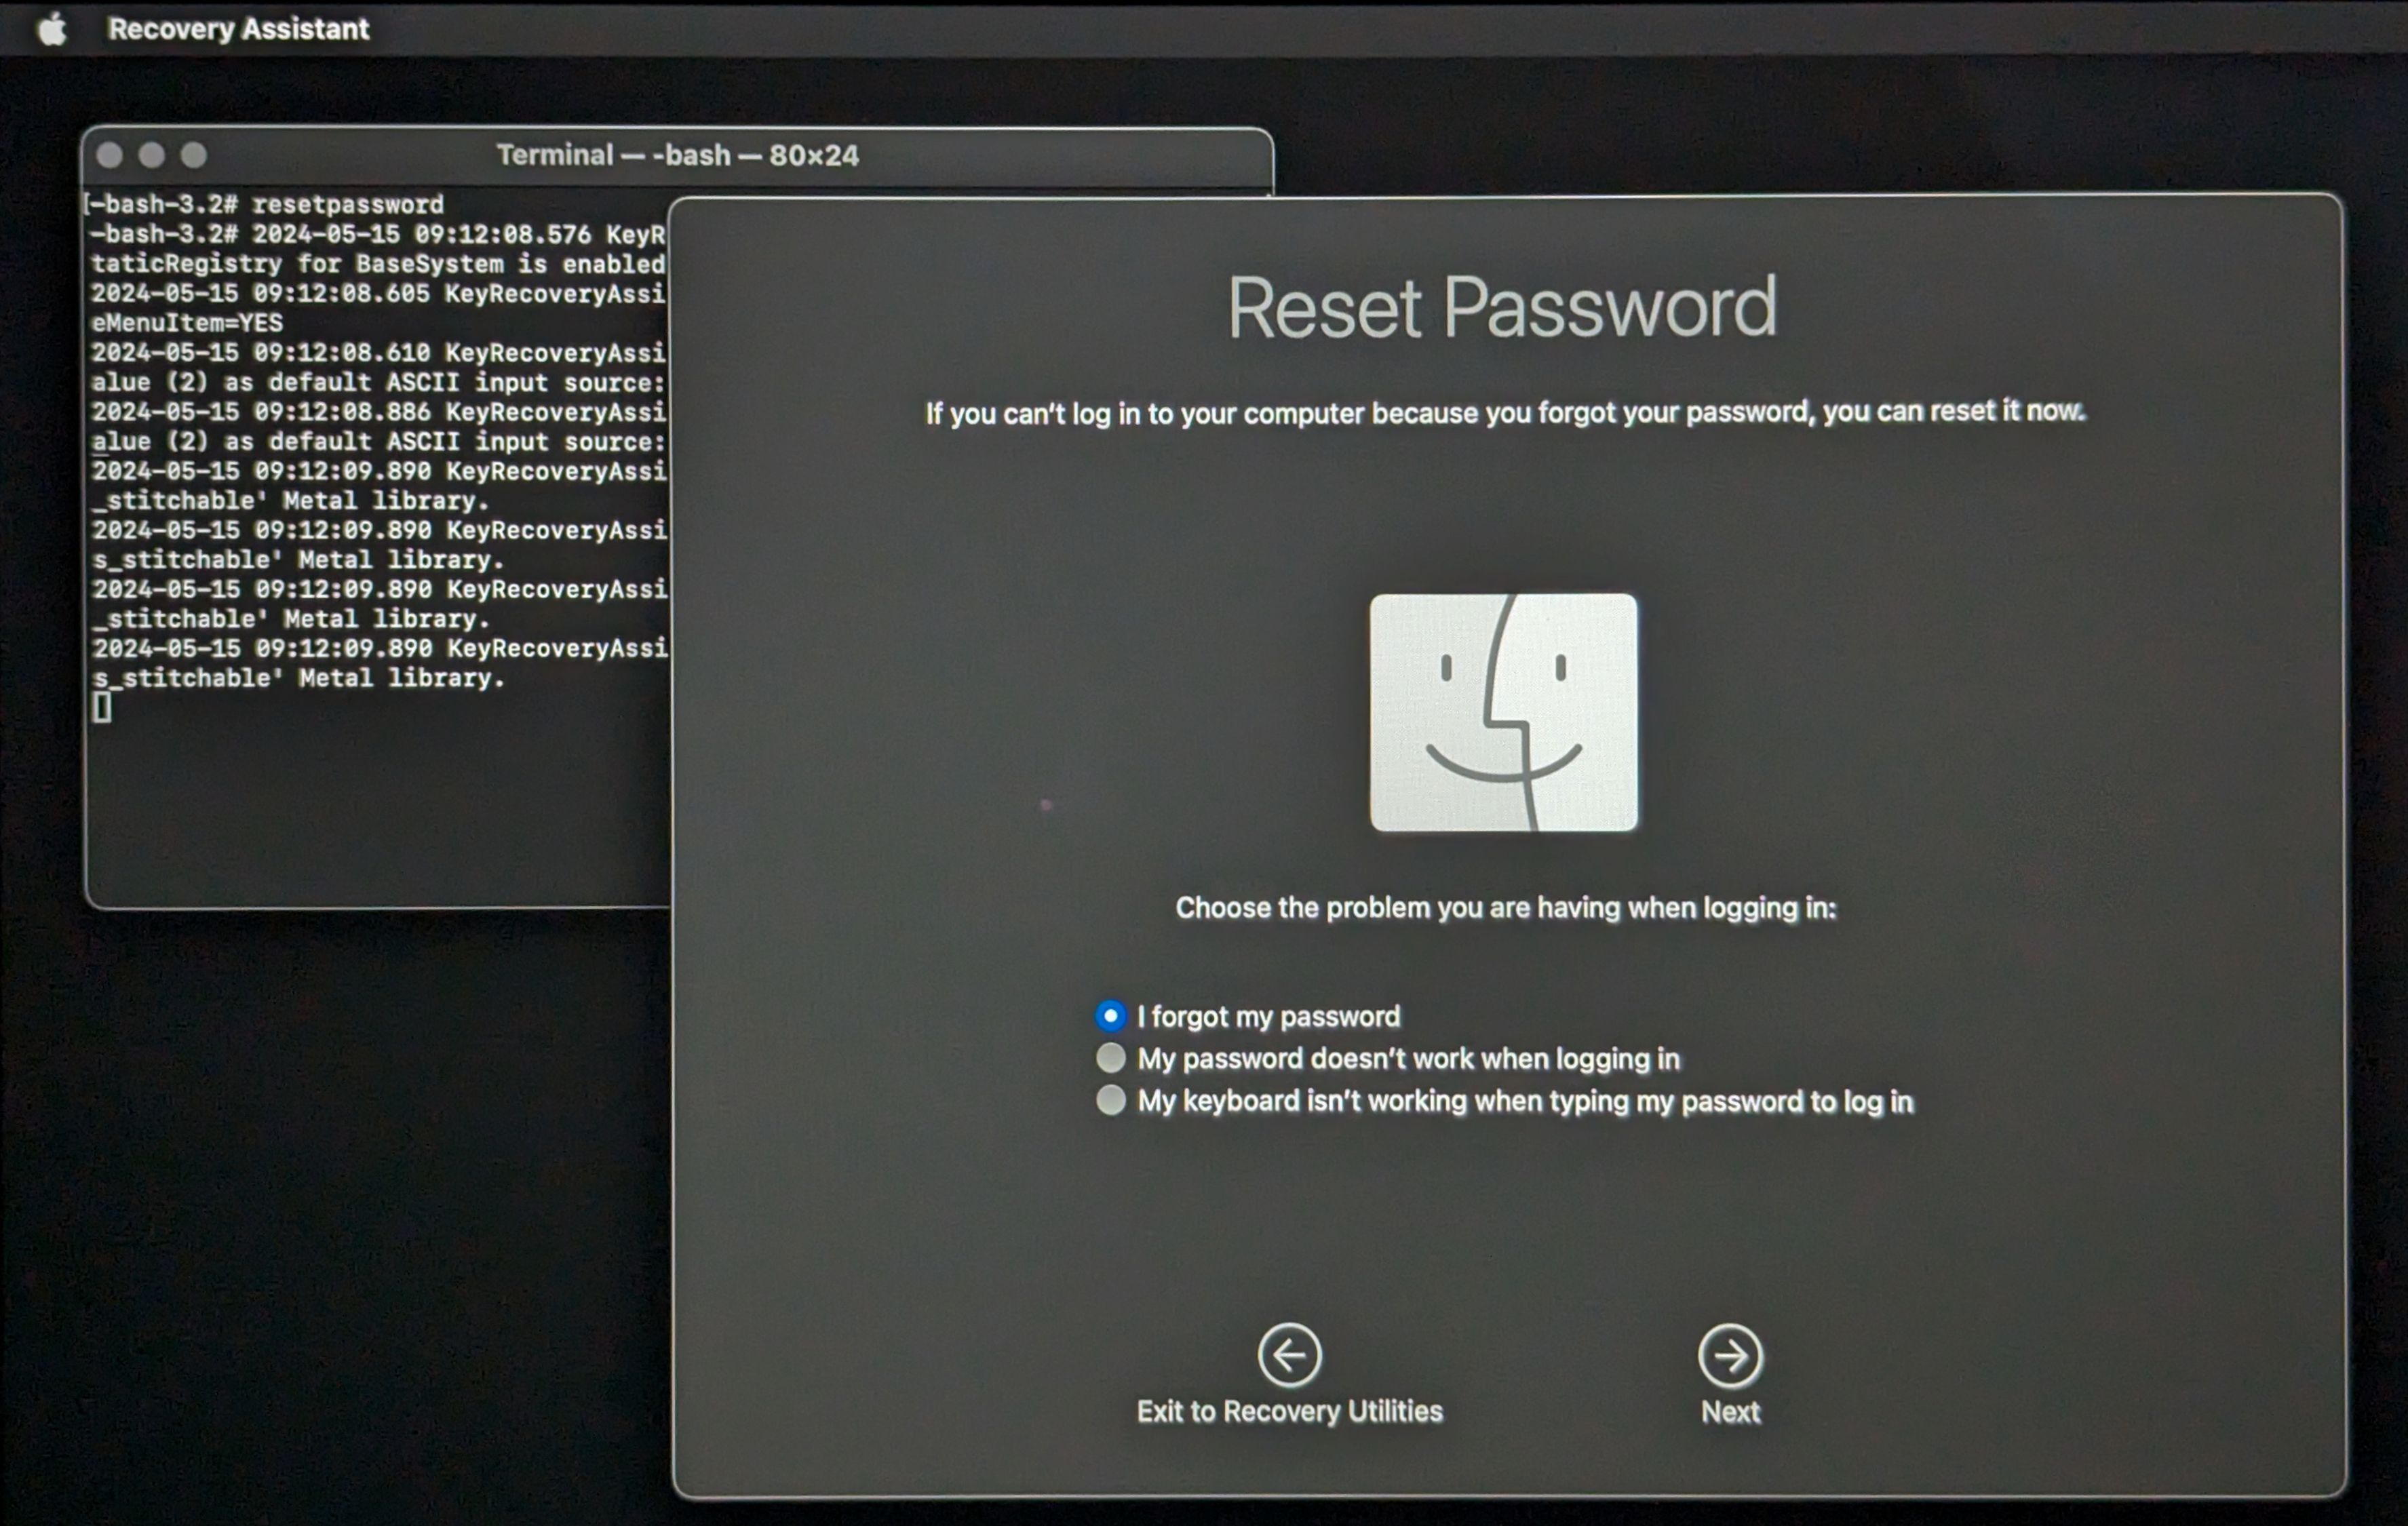 The Recovery Assistant password reset screen.